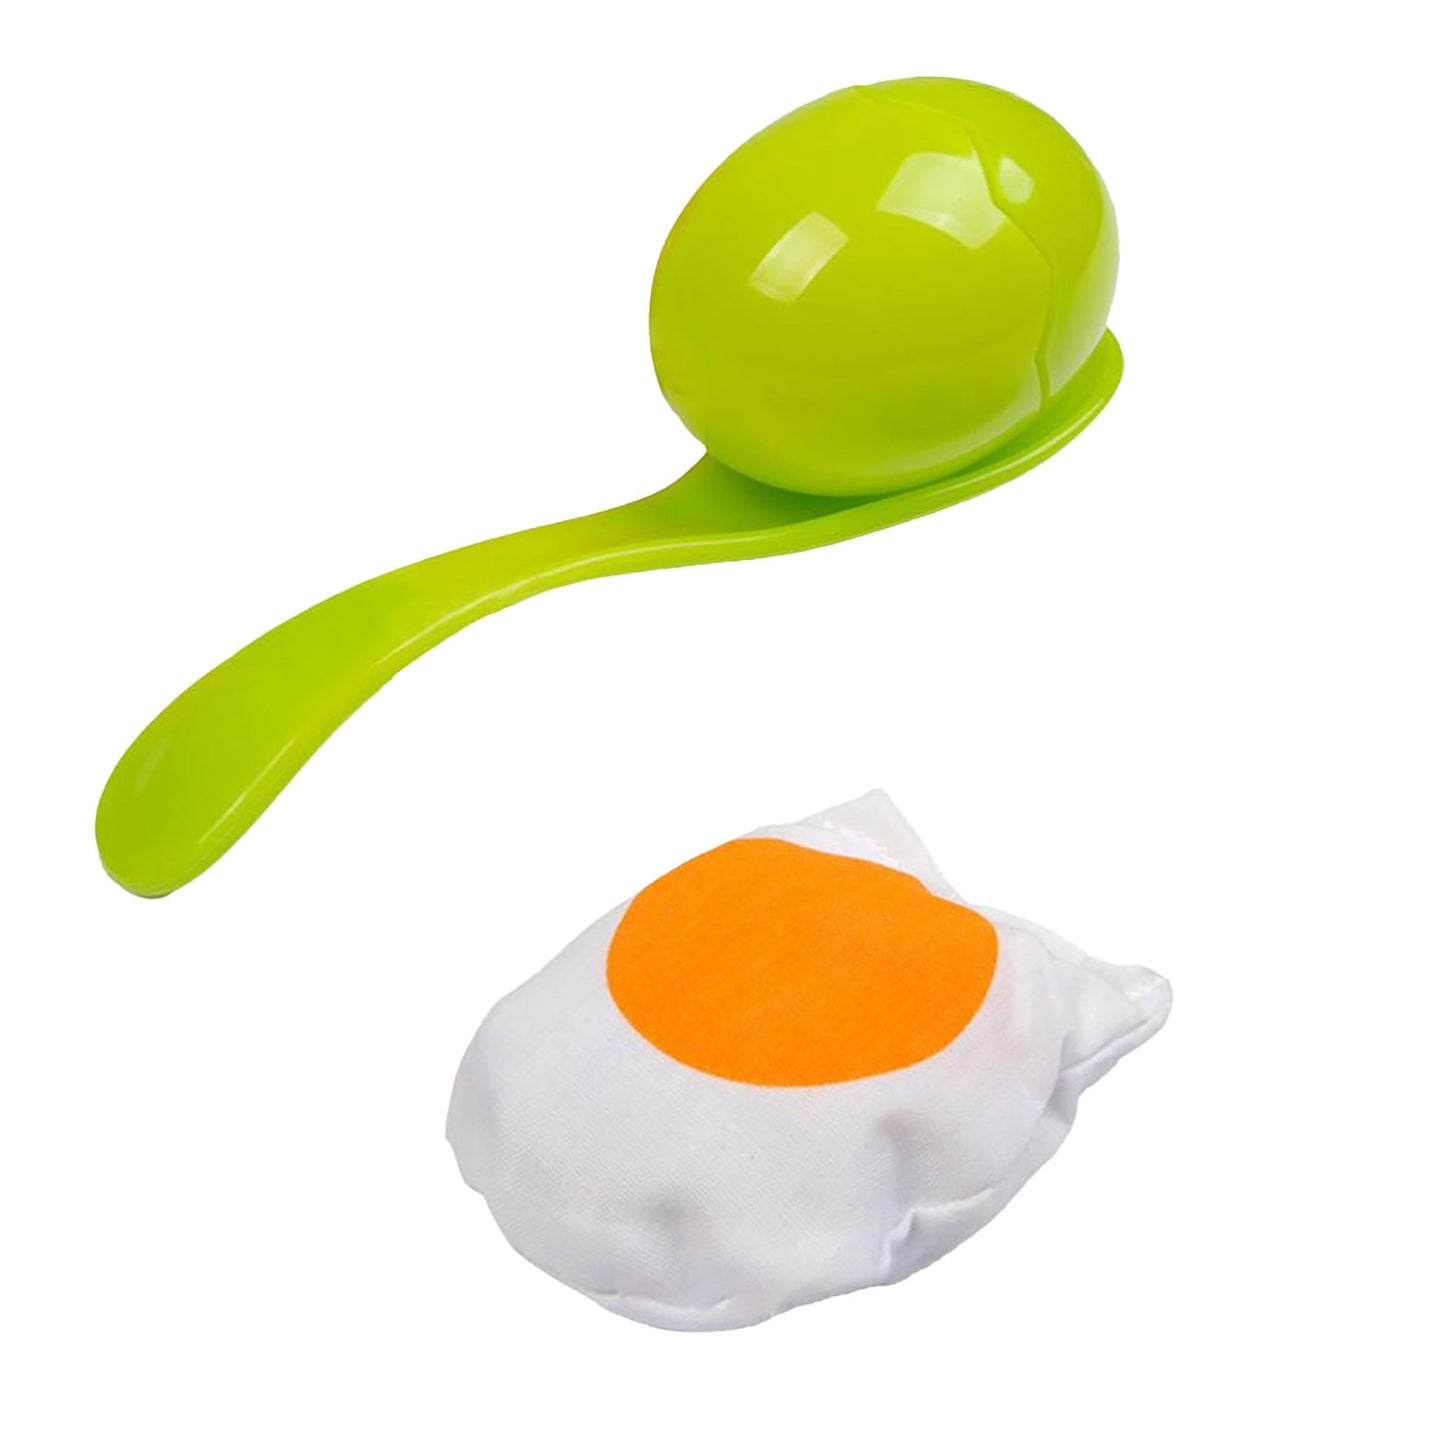 Eggs and Spoon Race Game Set: Fun and Exciting Sports Activity for Kids